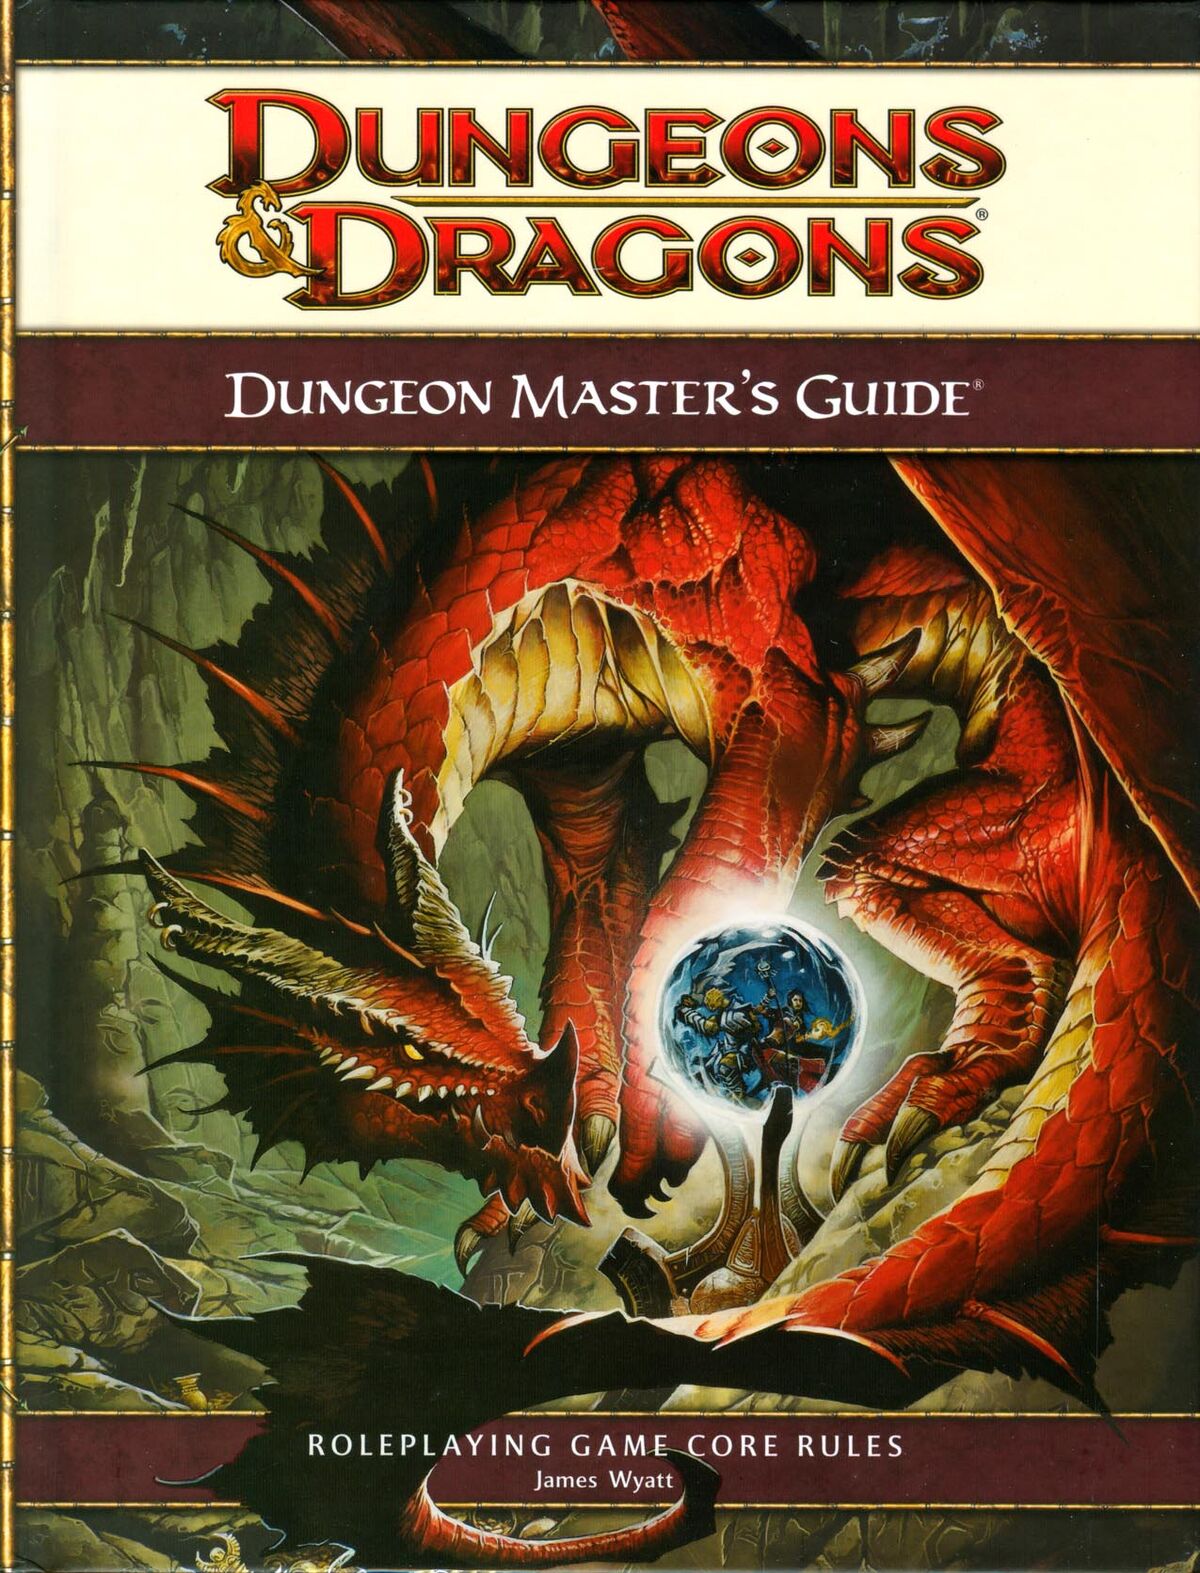 Dungeons and Dragons 4th Edition Game Day Promo Kit